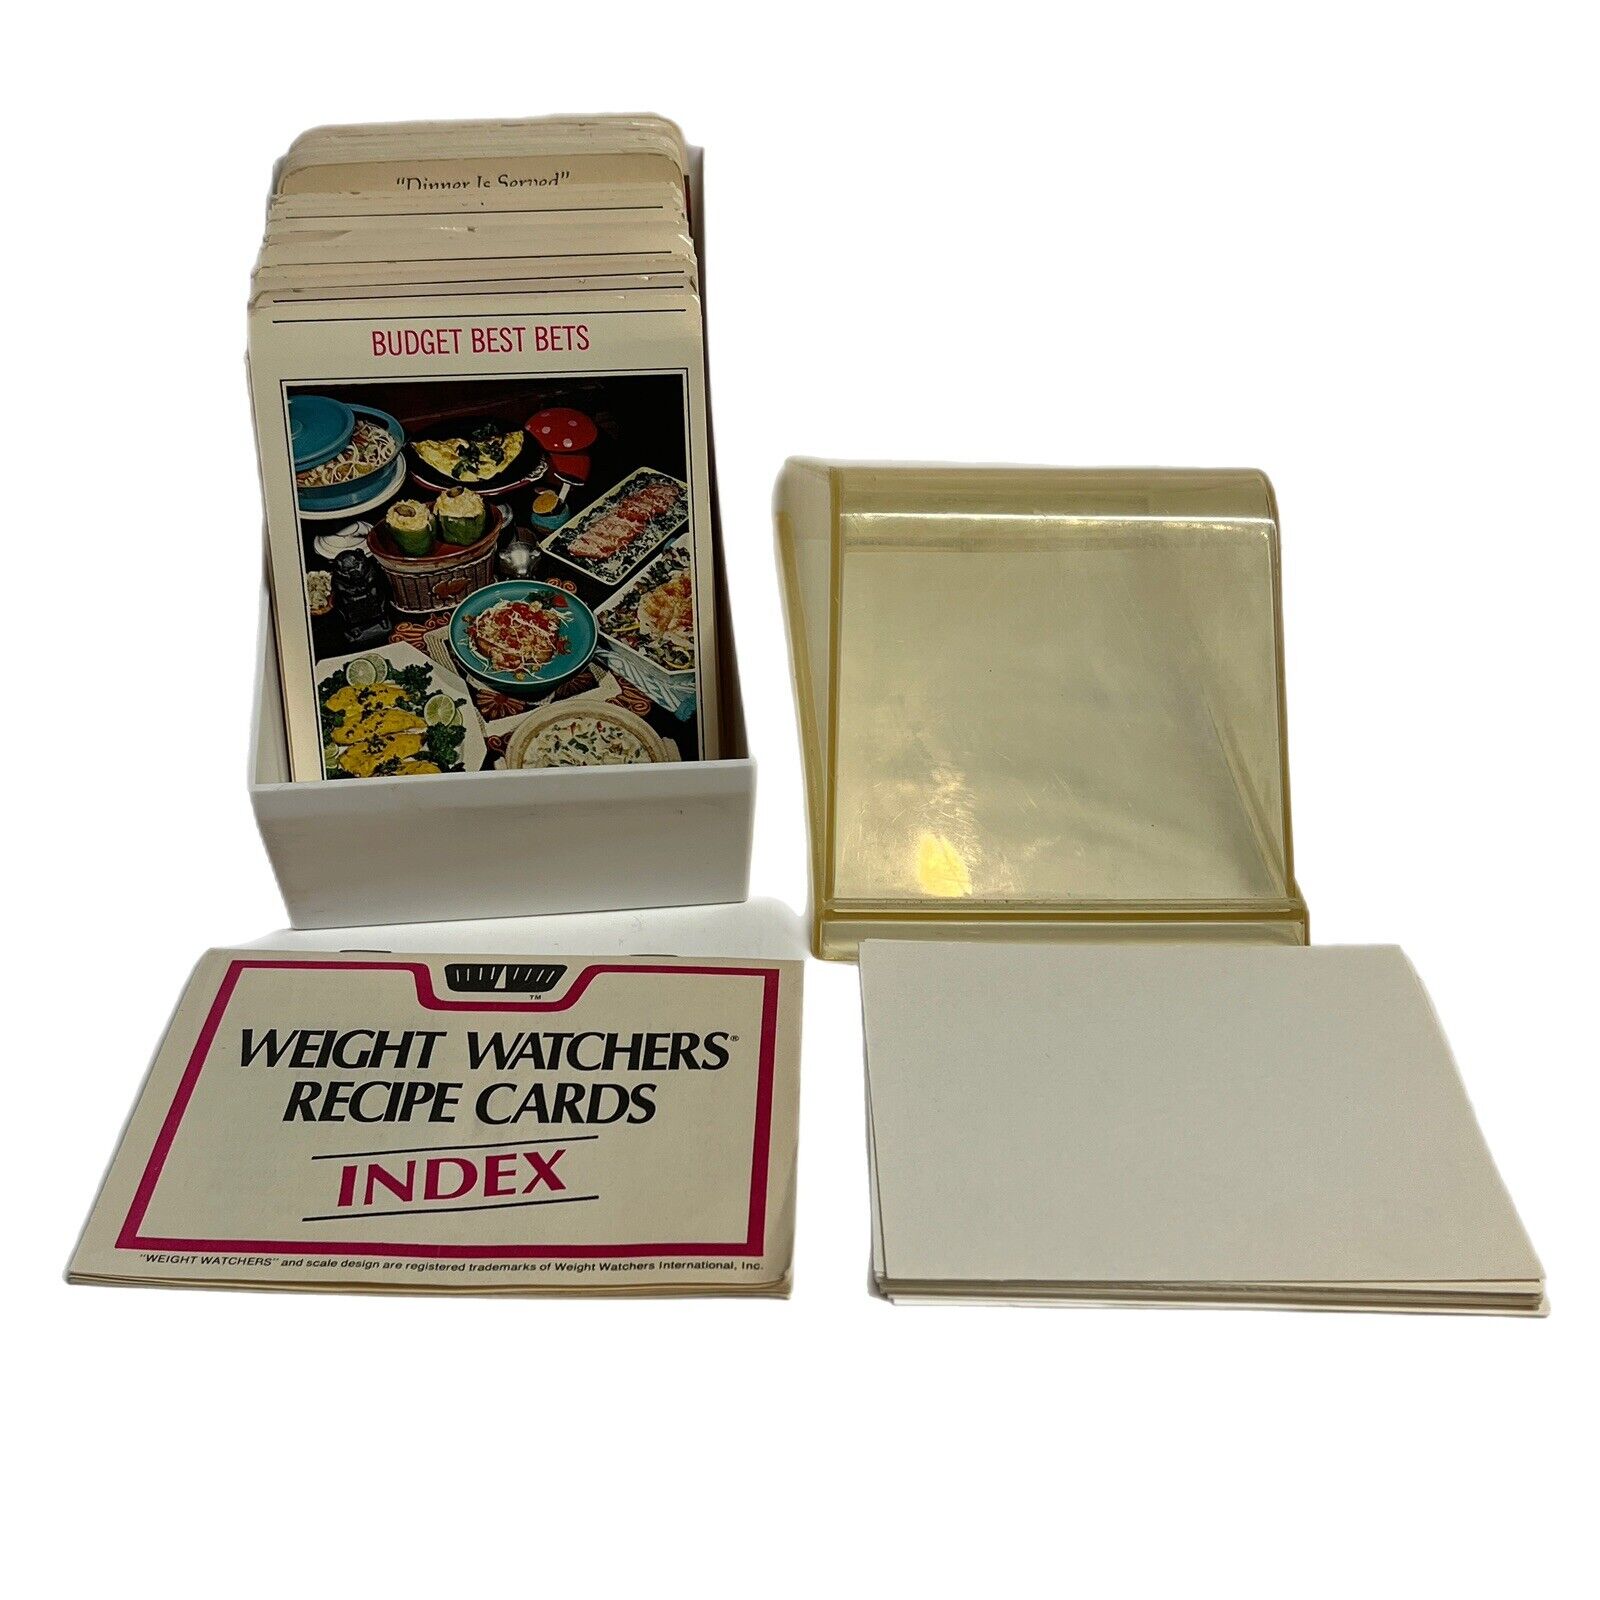 Weight Watchers & Dinner Is Served Over 350 Recipe Cards Index Case 1970s